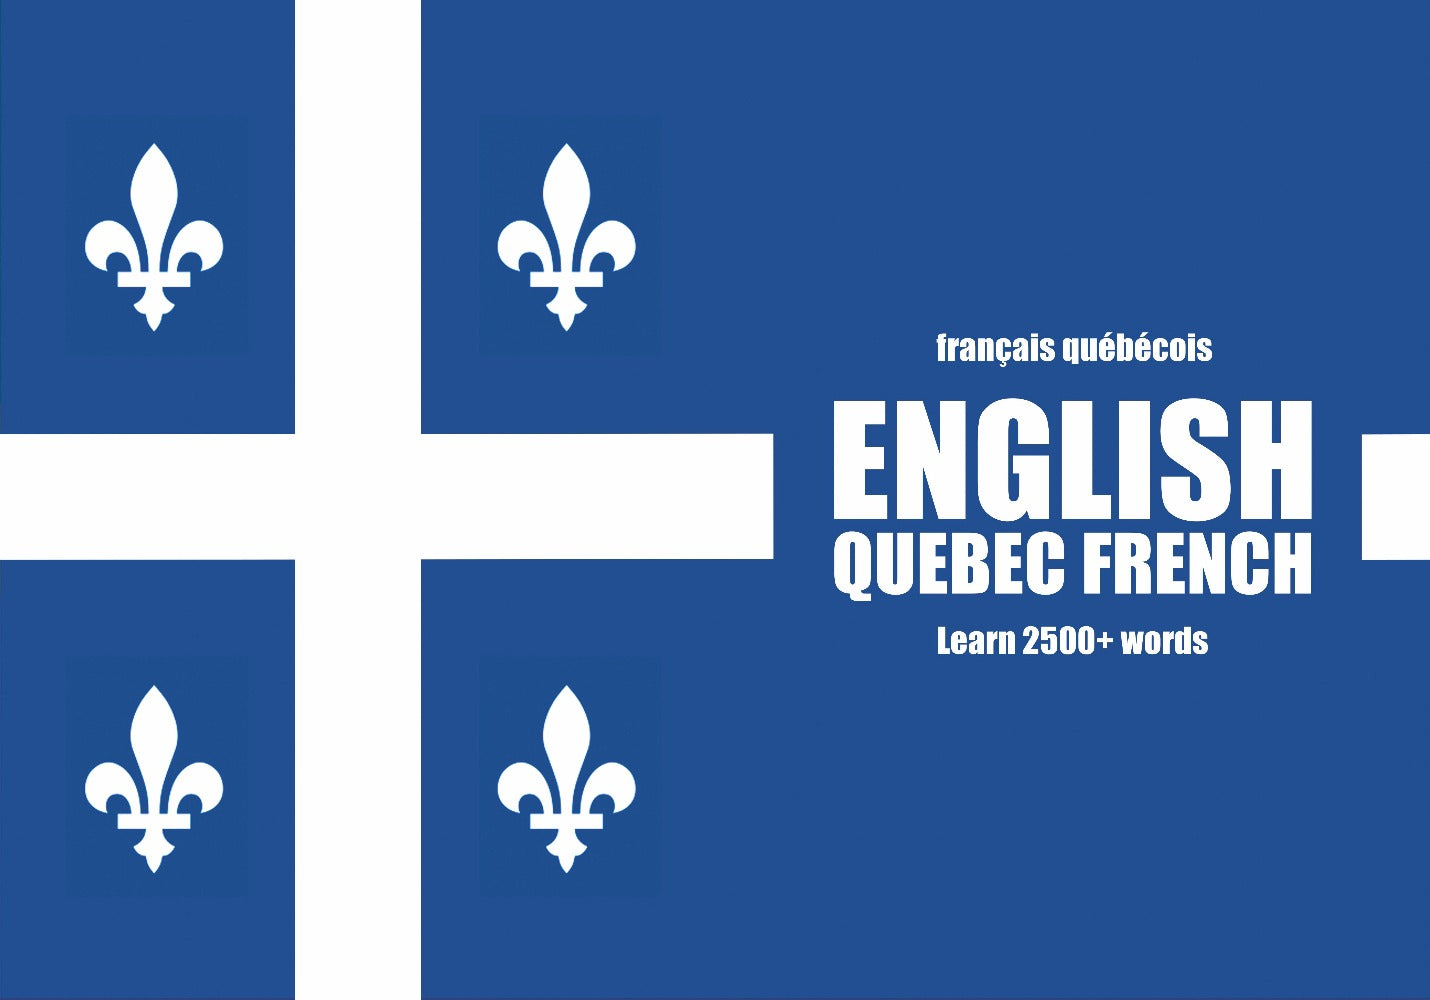 Quebec French language learning notebook cover